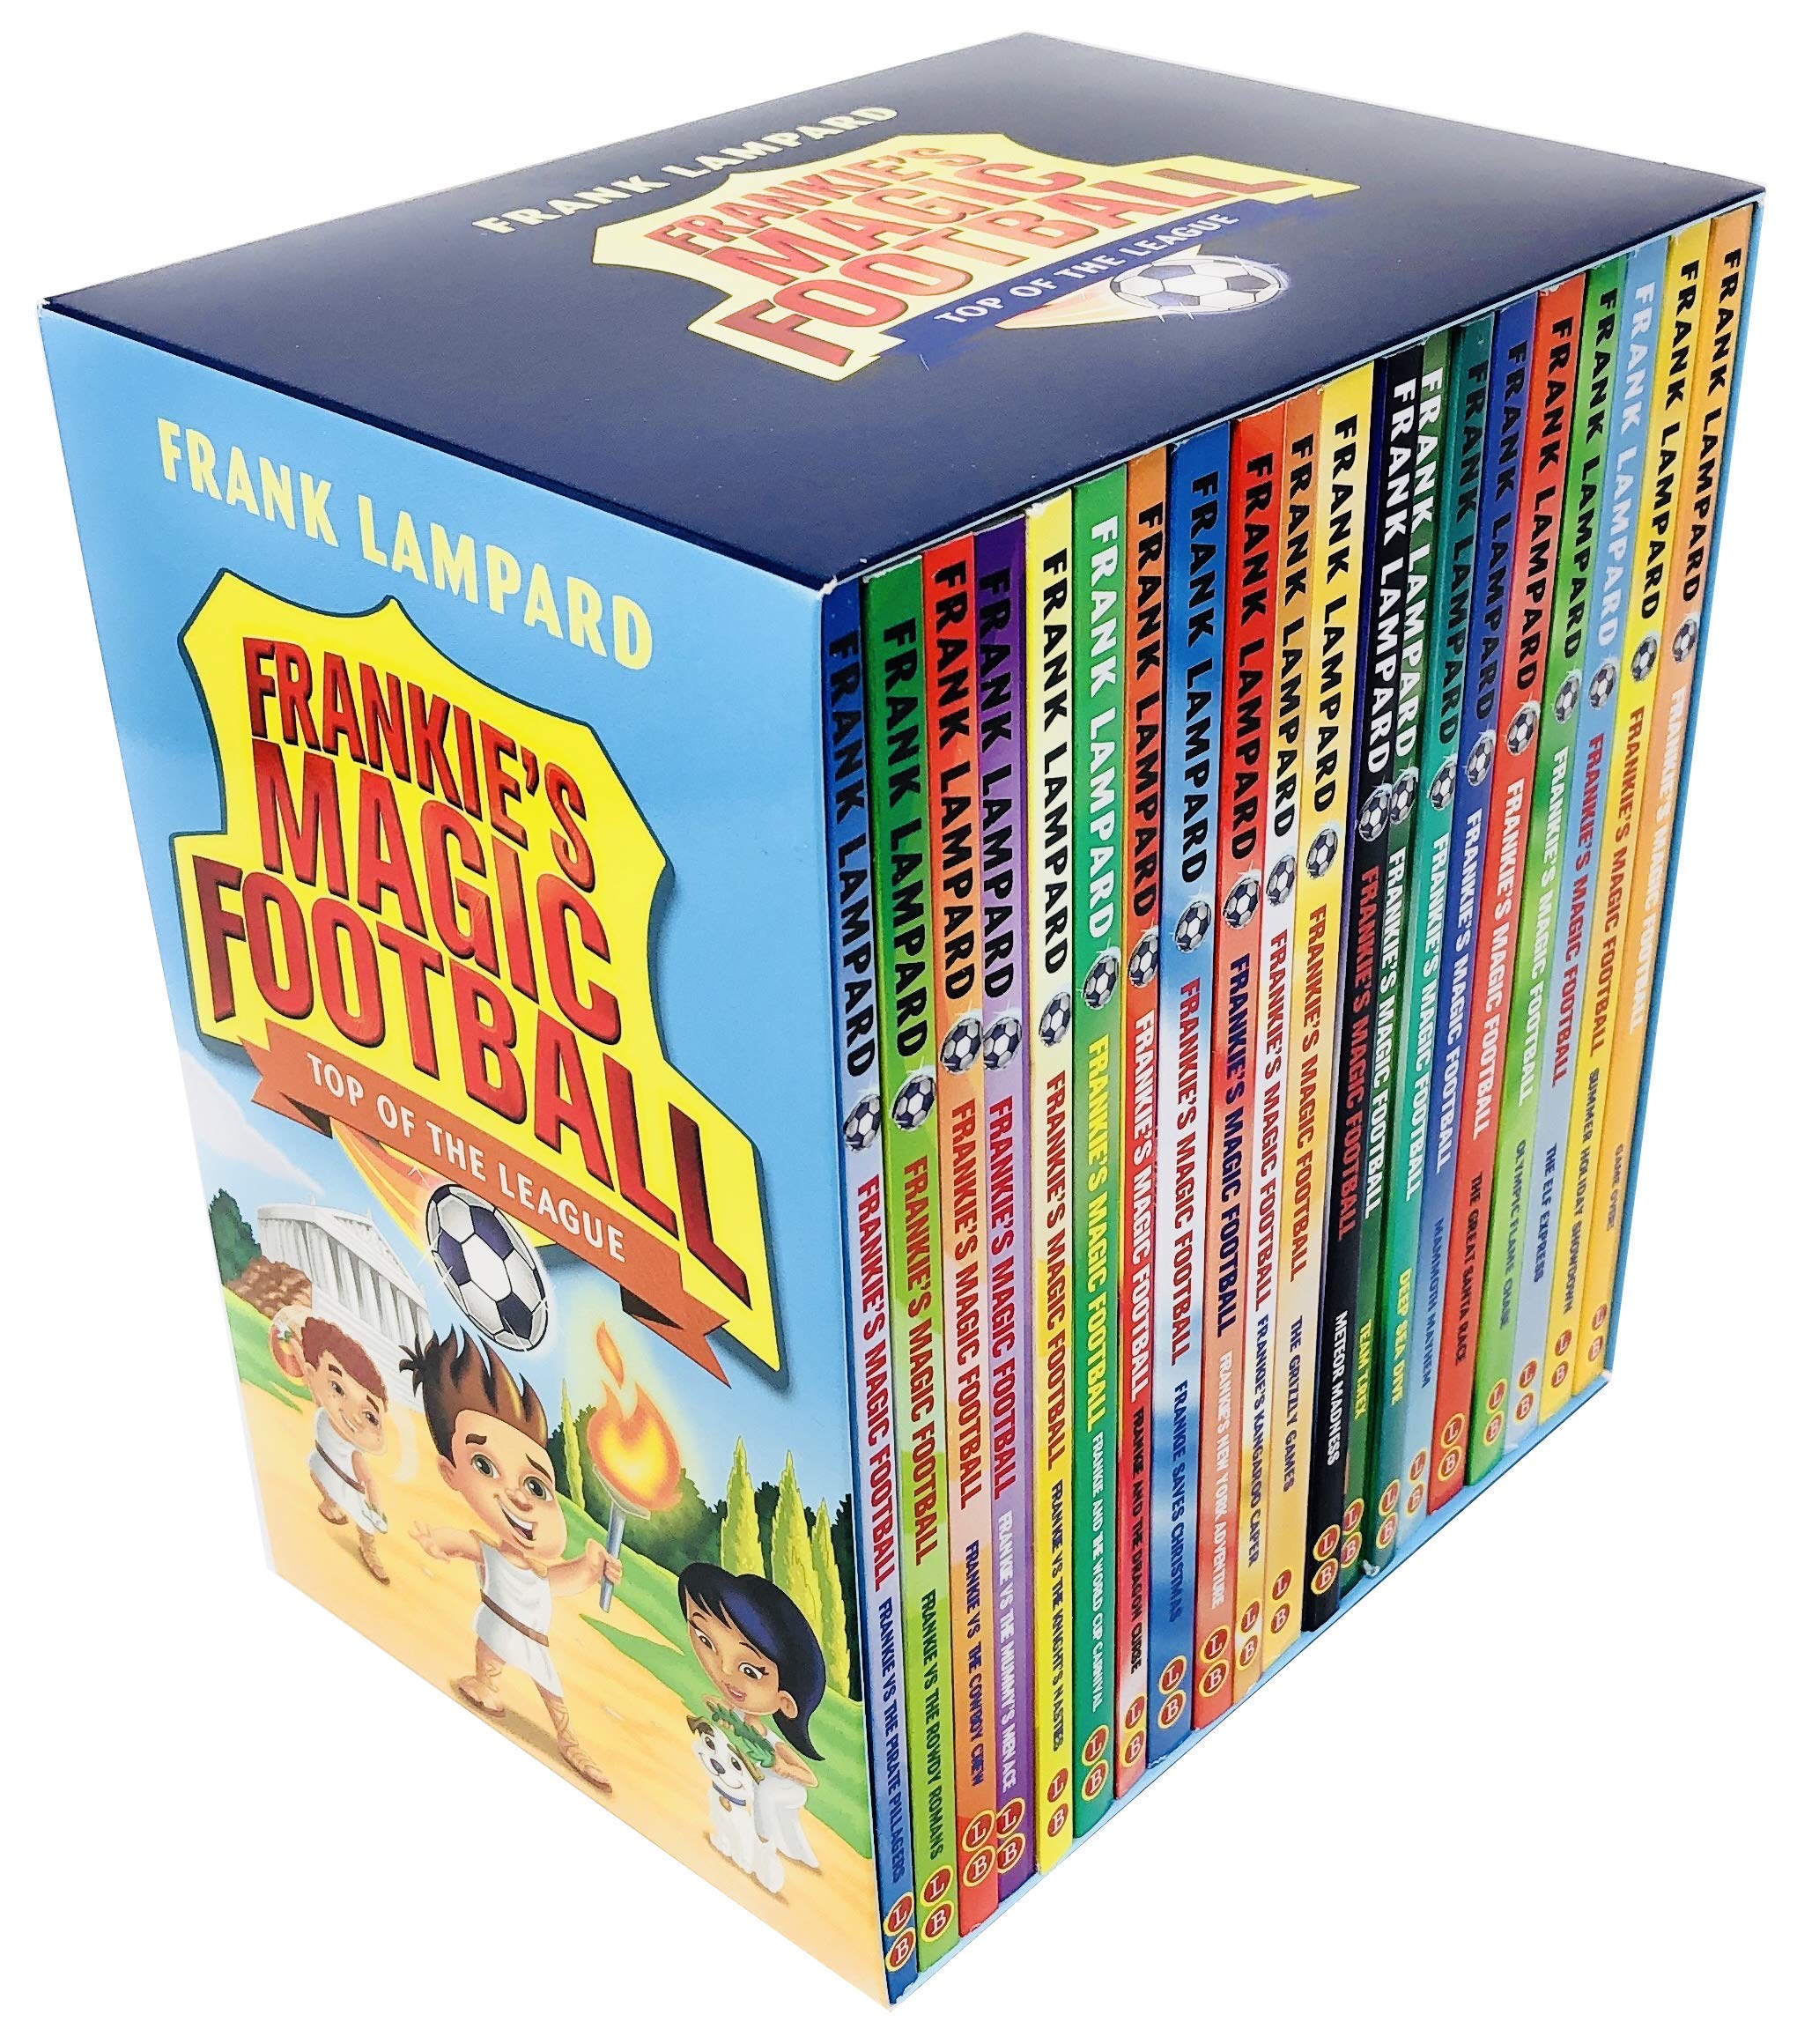 The Frankie's Magic Football Top of League Series 20 Books Box Set By Frank Lampard - Lets Buy Books